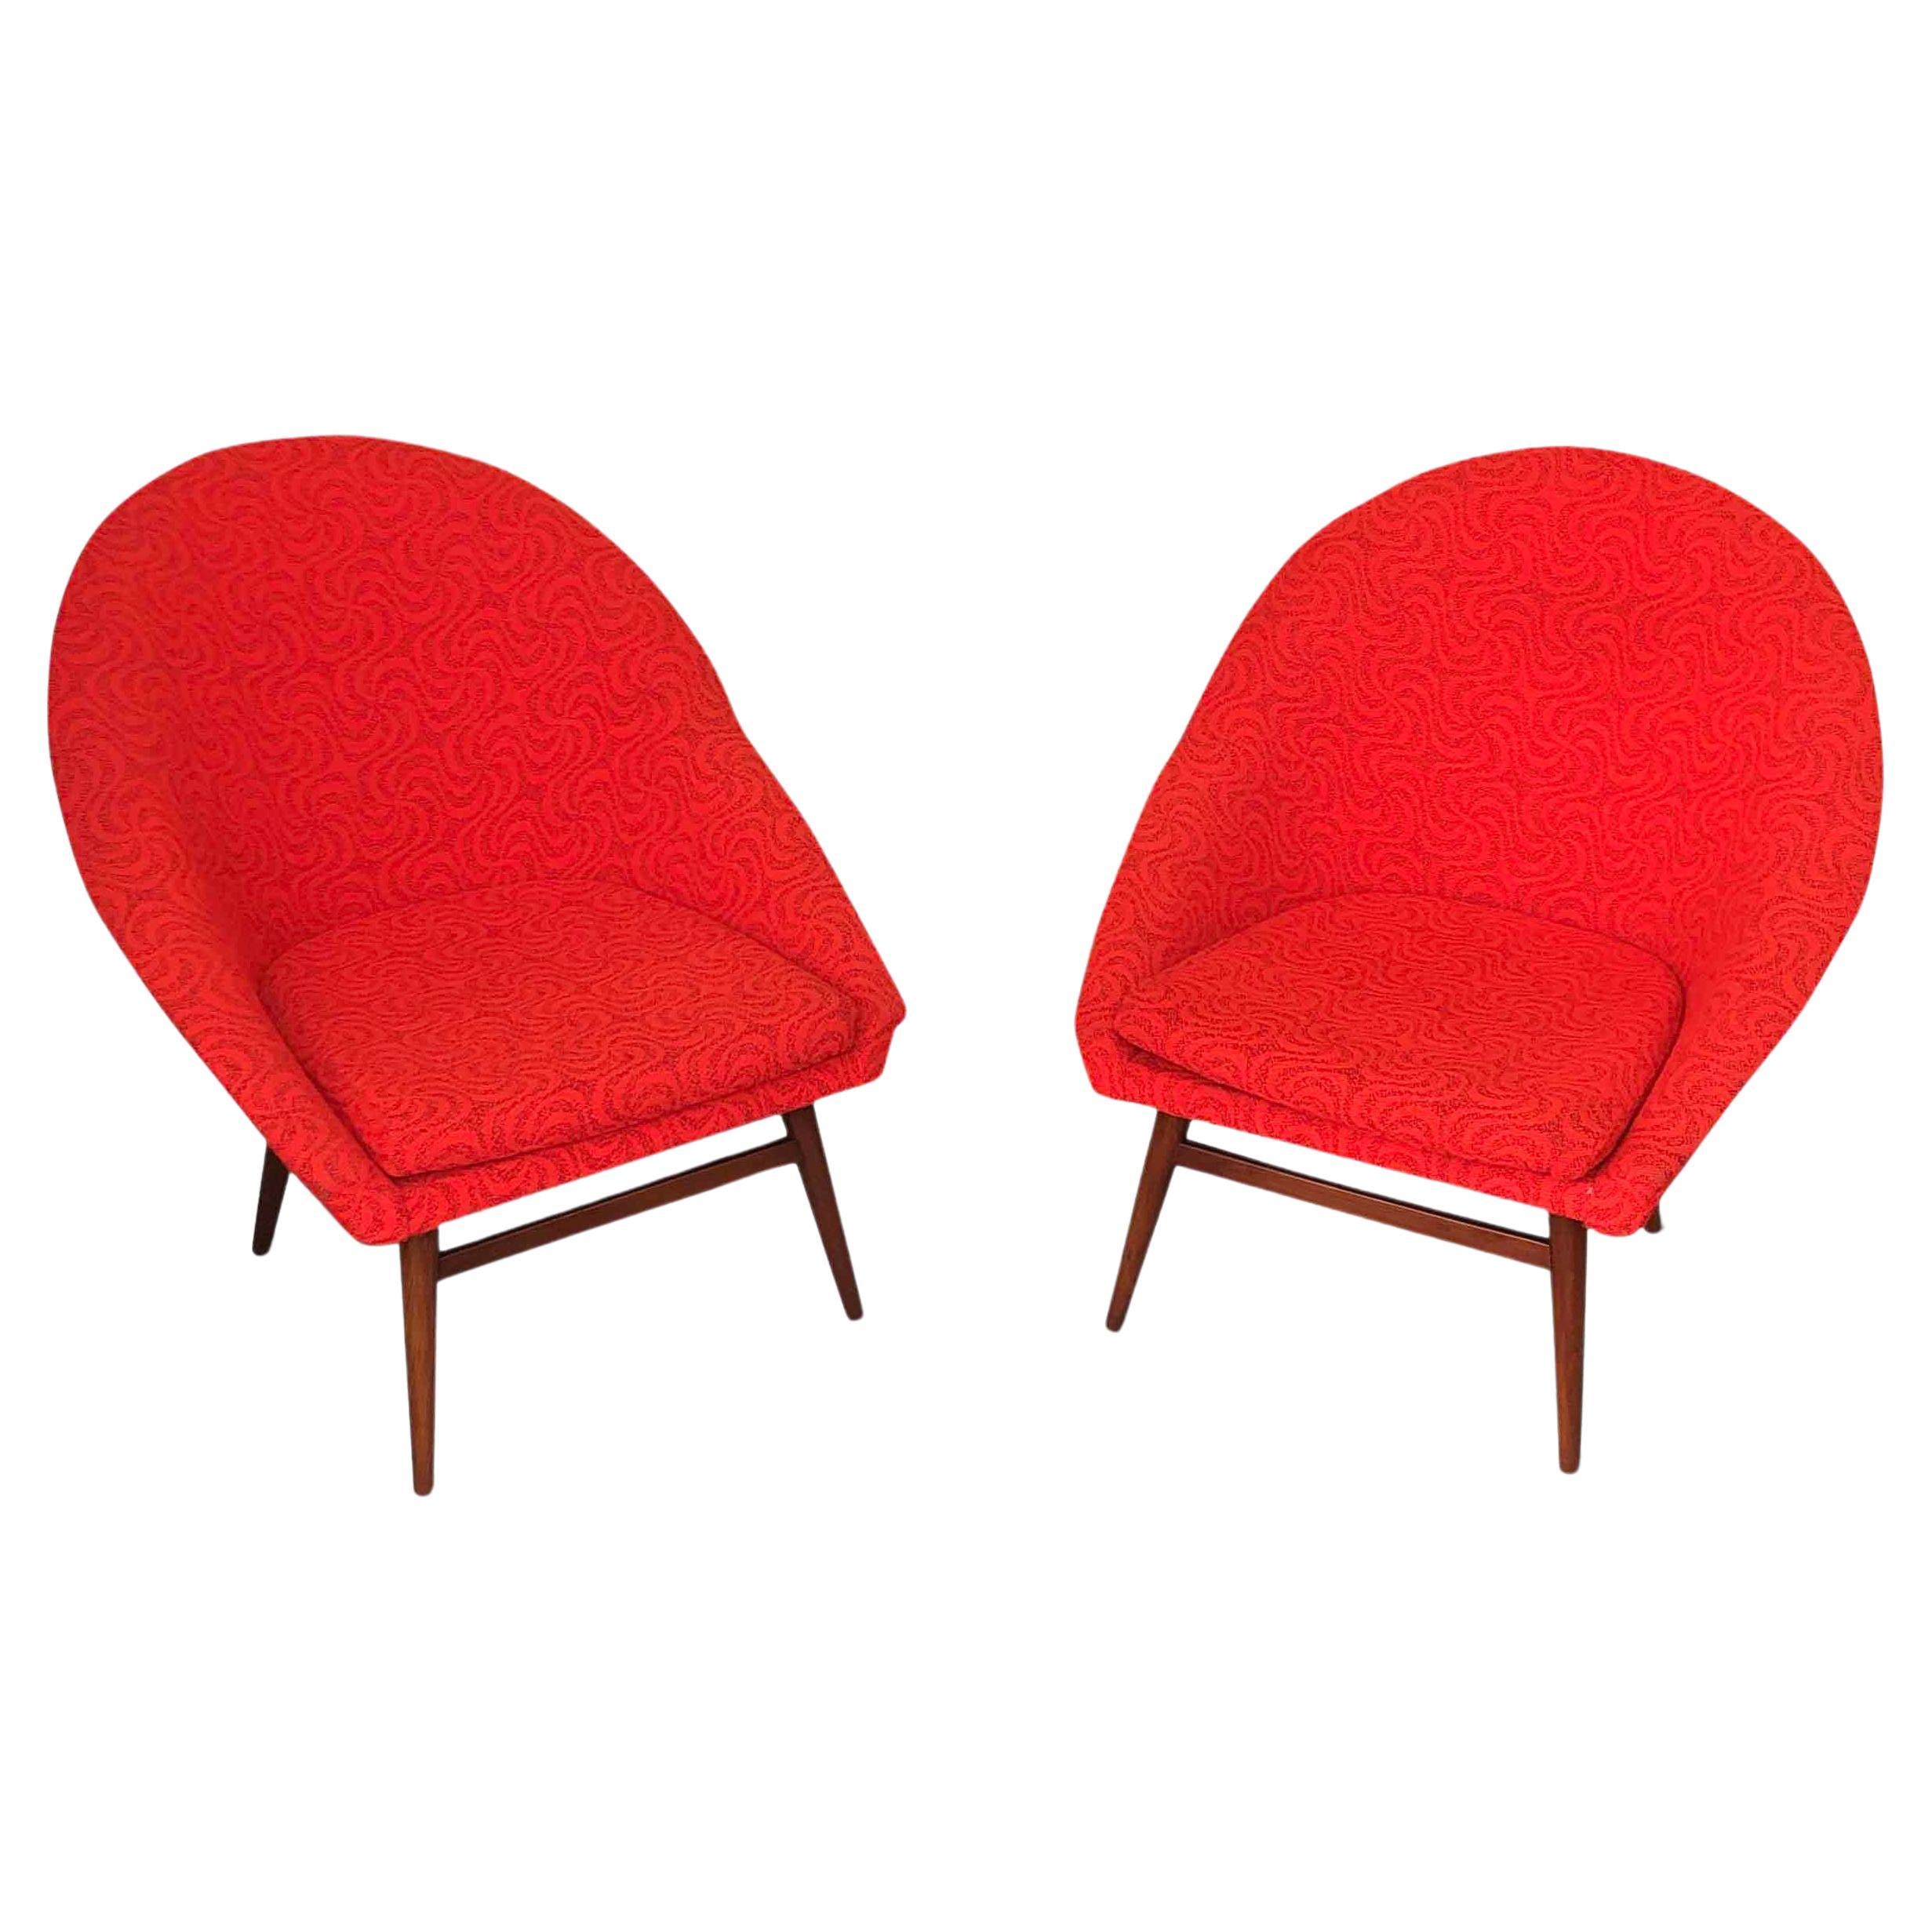 1960s Red Bucket Seats or Armchairs